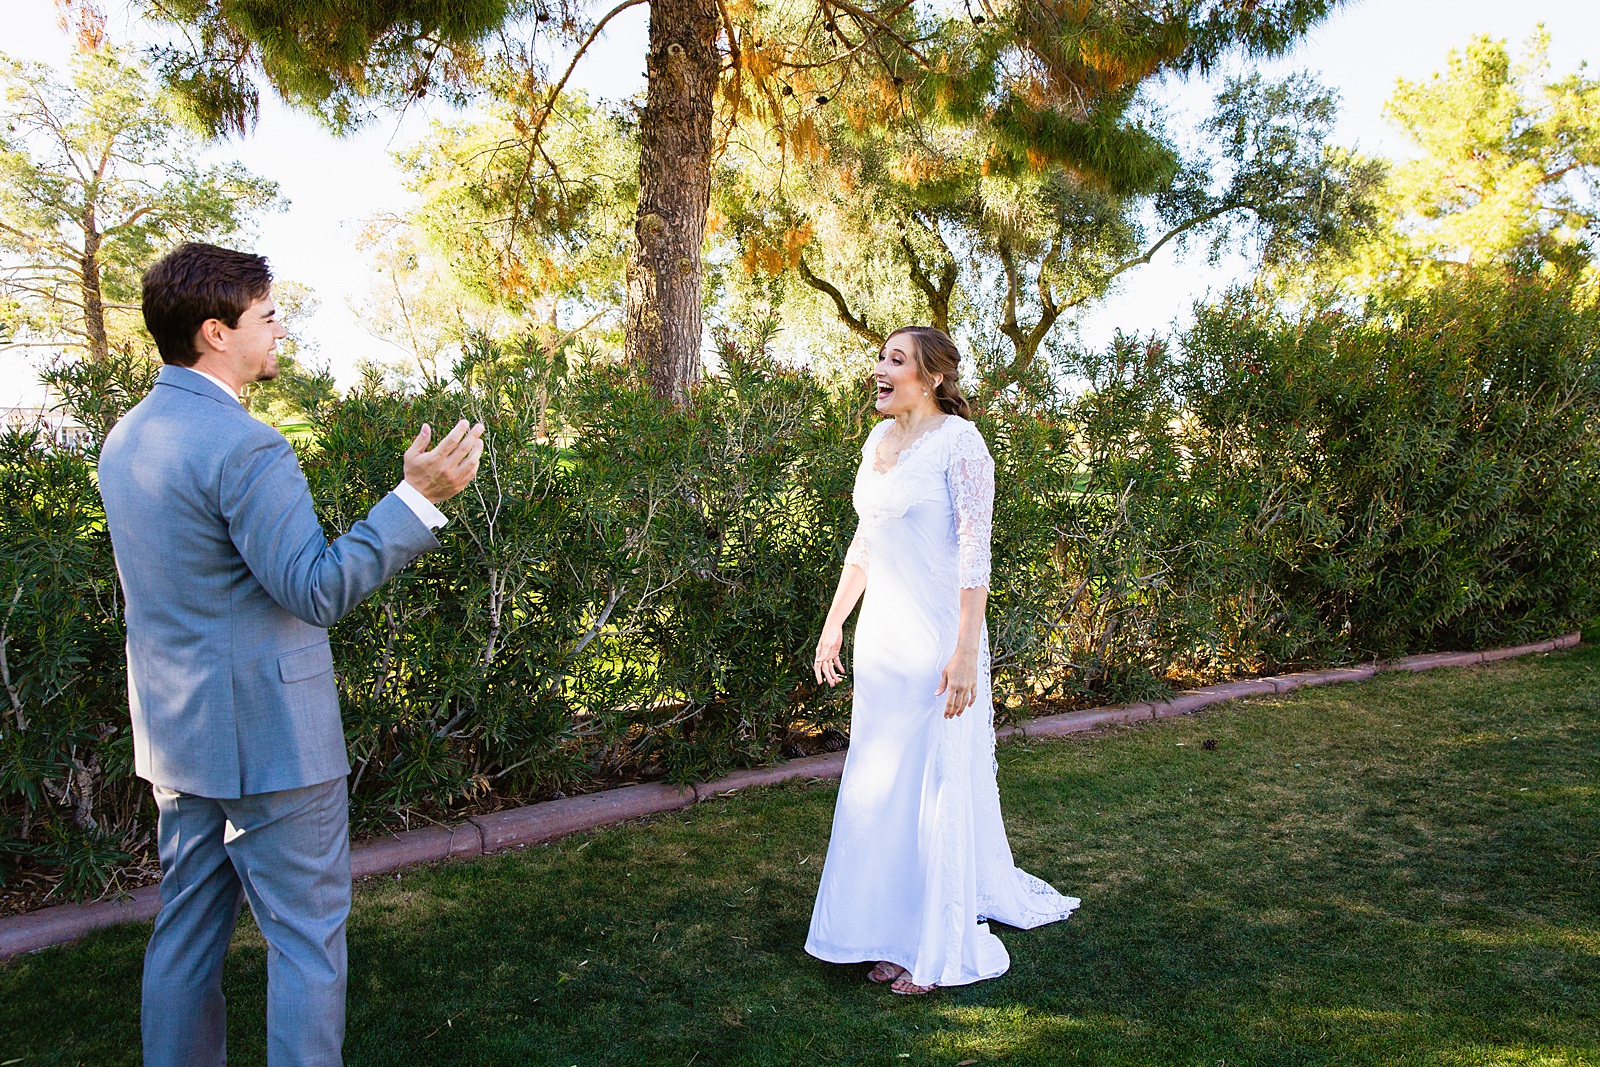 Bride and groom's first look at Ocotillo Oasis by Phoenix wedding photographer PMA Photography.